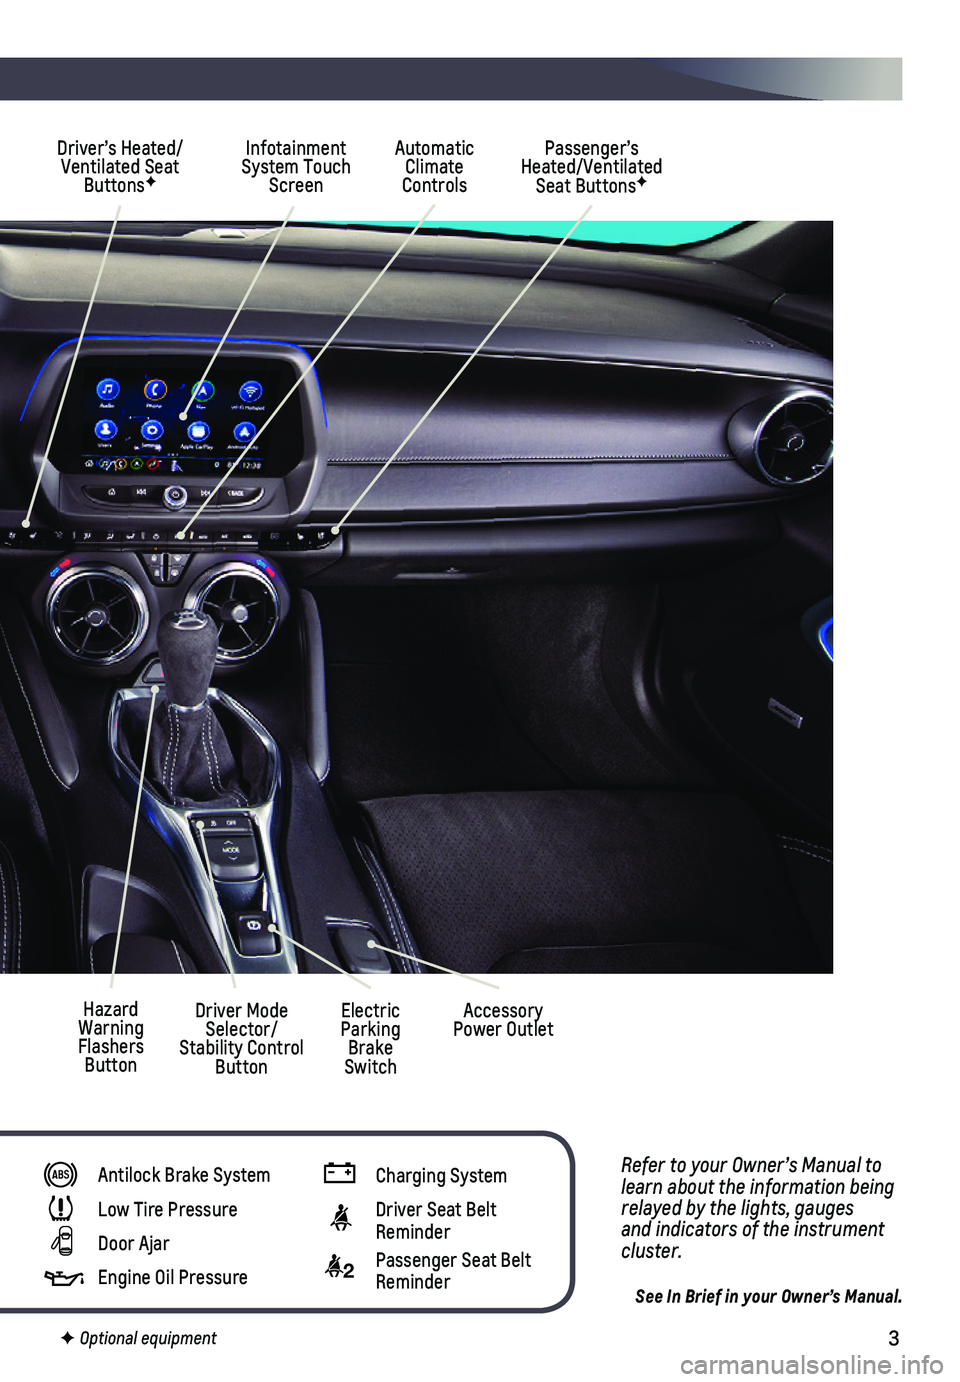 CHEVROLET CAMARO 2019  Get To Know Guide 3
Refer to your Owner’s Manual to learn about the information being relayed by the lights, gauges and indicators of the instrument cluster.
See In Brief in your Owner’s Manual.
Driver’s Heated/V